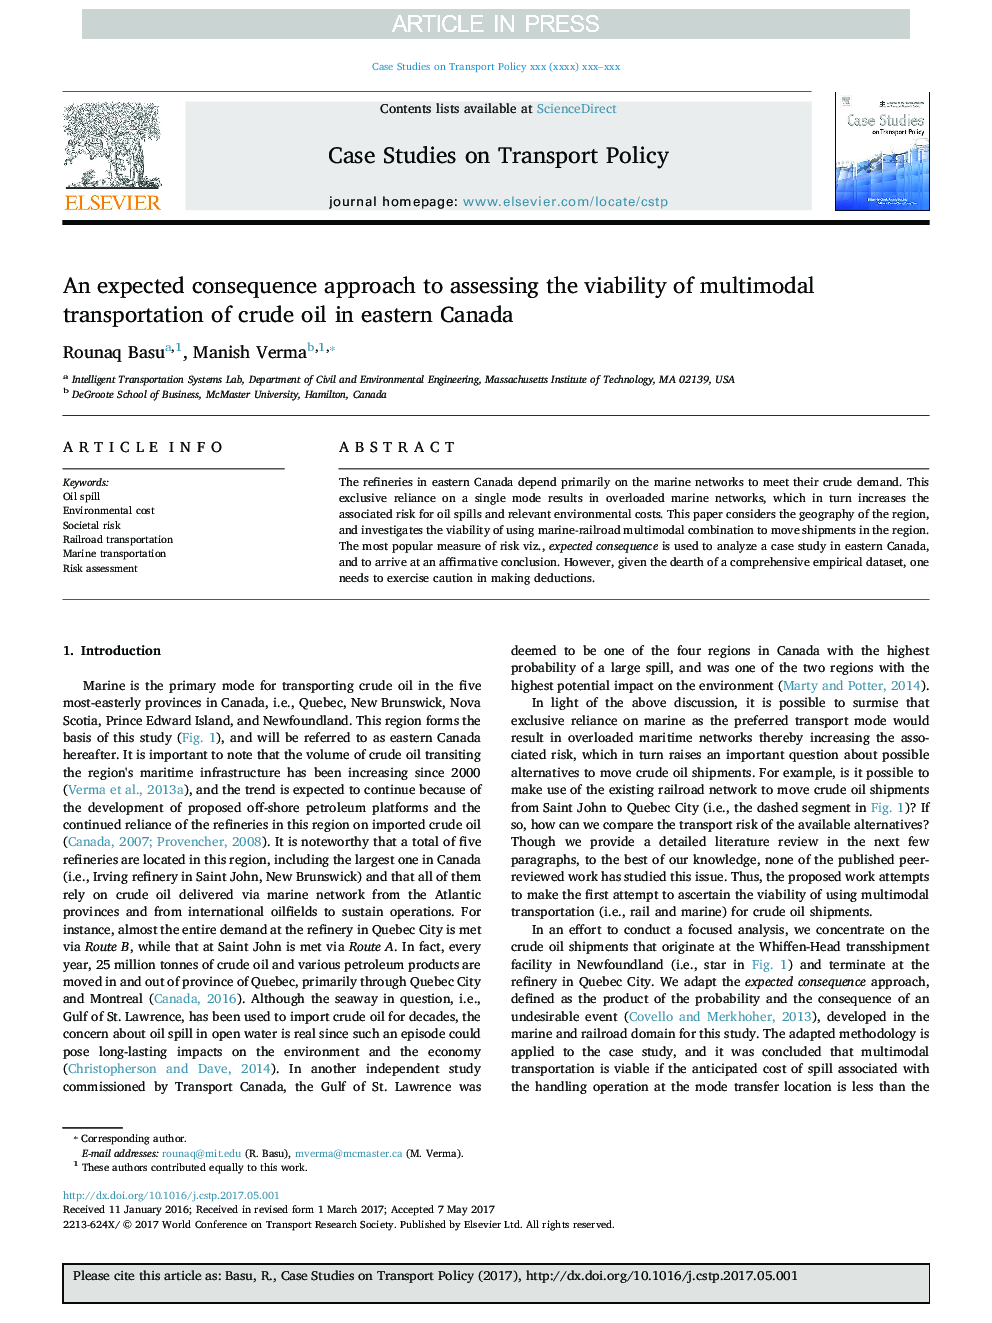 An expected consequence approach to assessing the viability of multimodal transportation of crude oil in eastern Canada